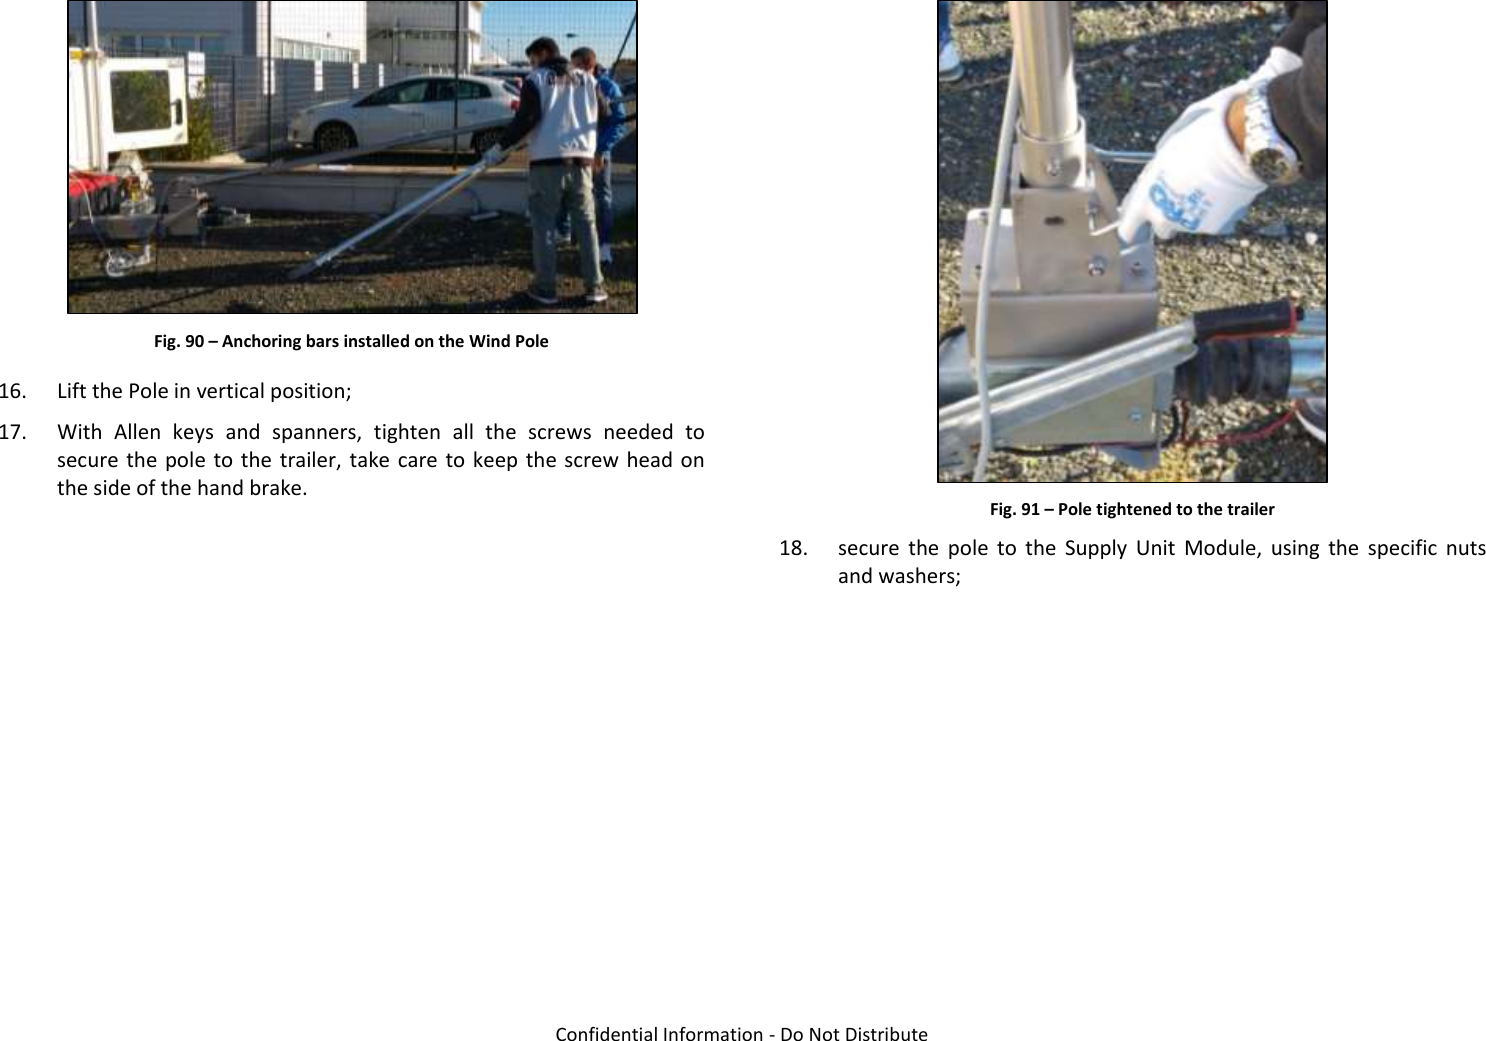   Confidential Information - Do Not Distribute  Fig. 90 – Anchoring bars installed on the Wind Pole 16. Lift the Pole in vertical position; 17. With  Allen  keys  and  spanners,  tighten  all  the  screws  needed  to secure the pole to the  trailer, take care to keep the screw head on the side of the hand brake.   Fig. 91 – Pole tightened to the trailer 18. secure  the  pole  to  the  Supply  Unit  Module,  using  the  specific  nuts and washers; 